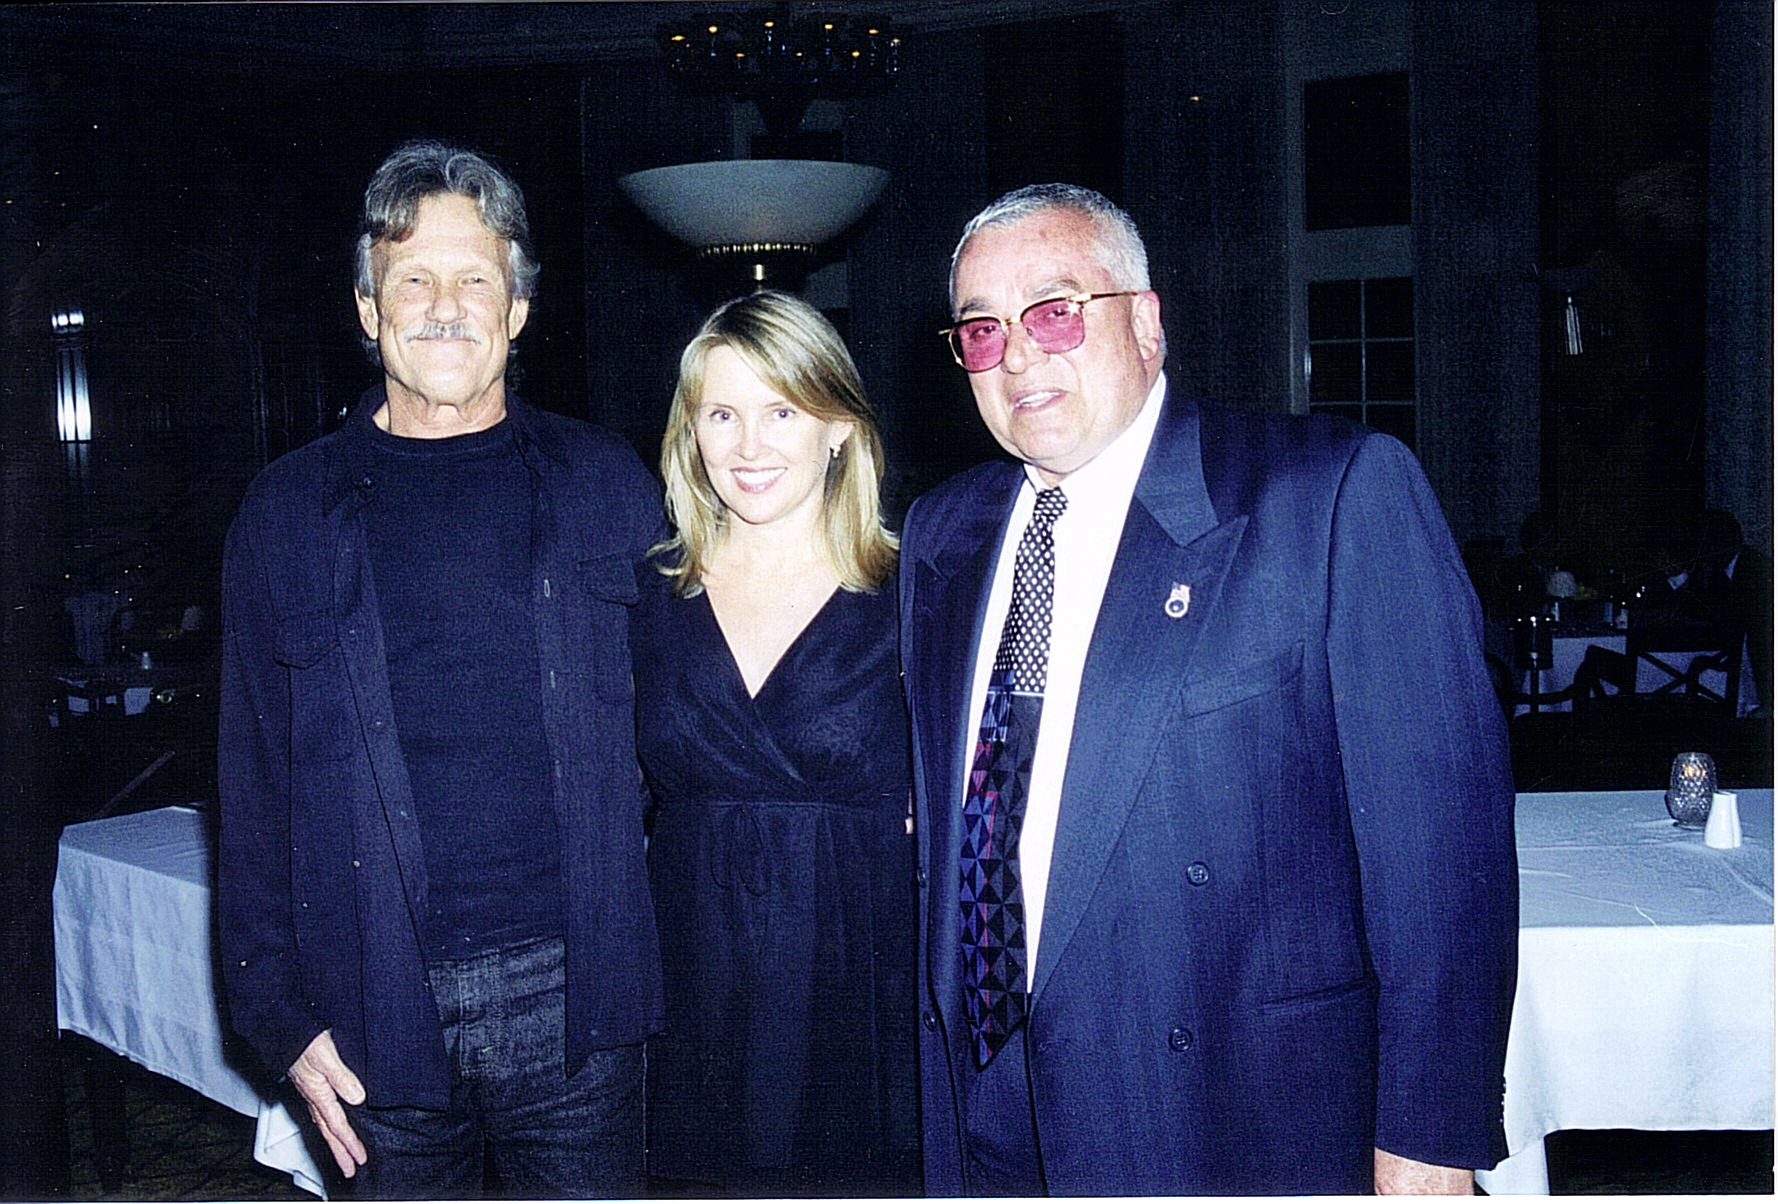 Harry with Veteran of the Year Kris Kristofferson and his daughter Kristine